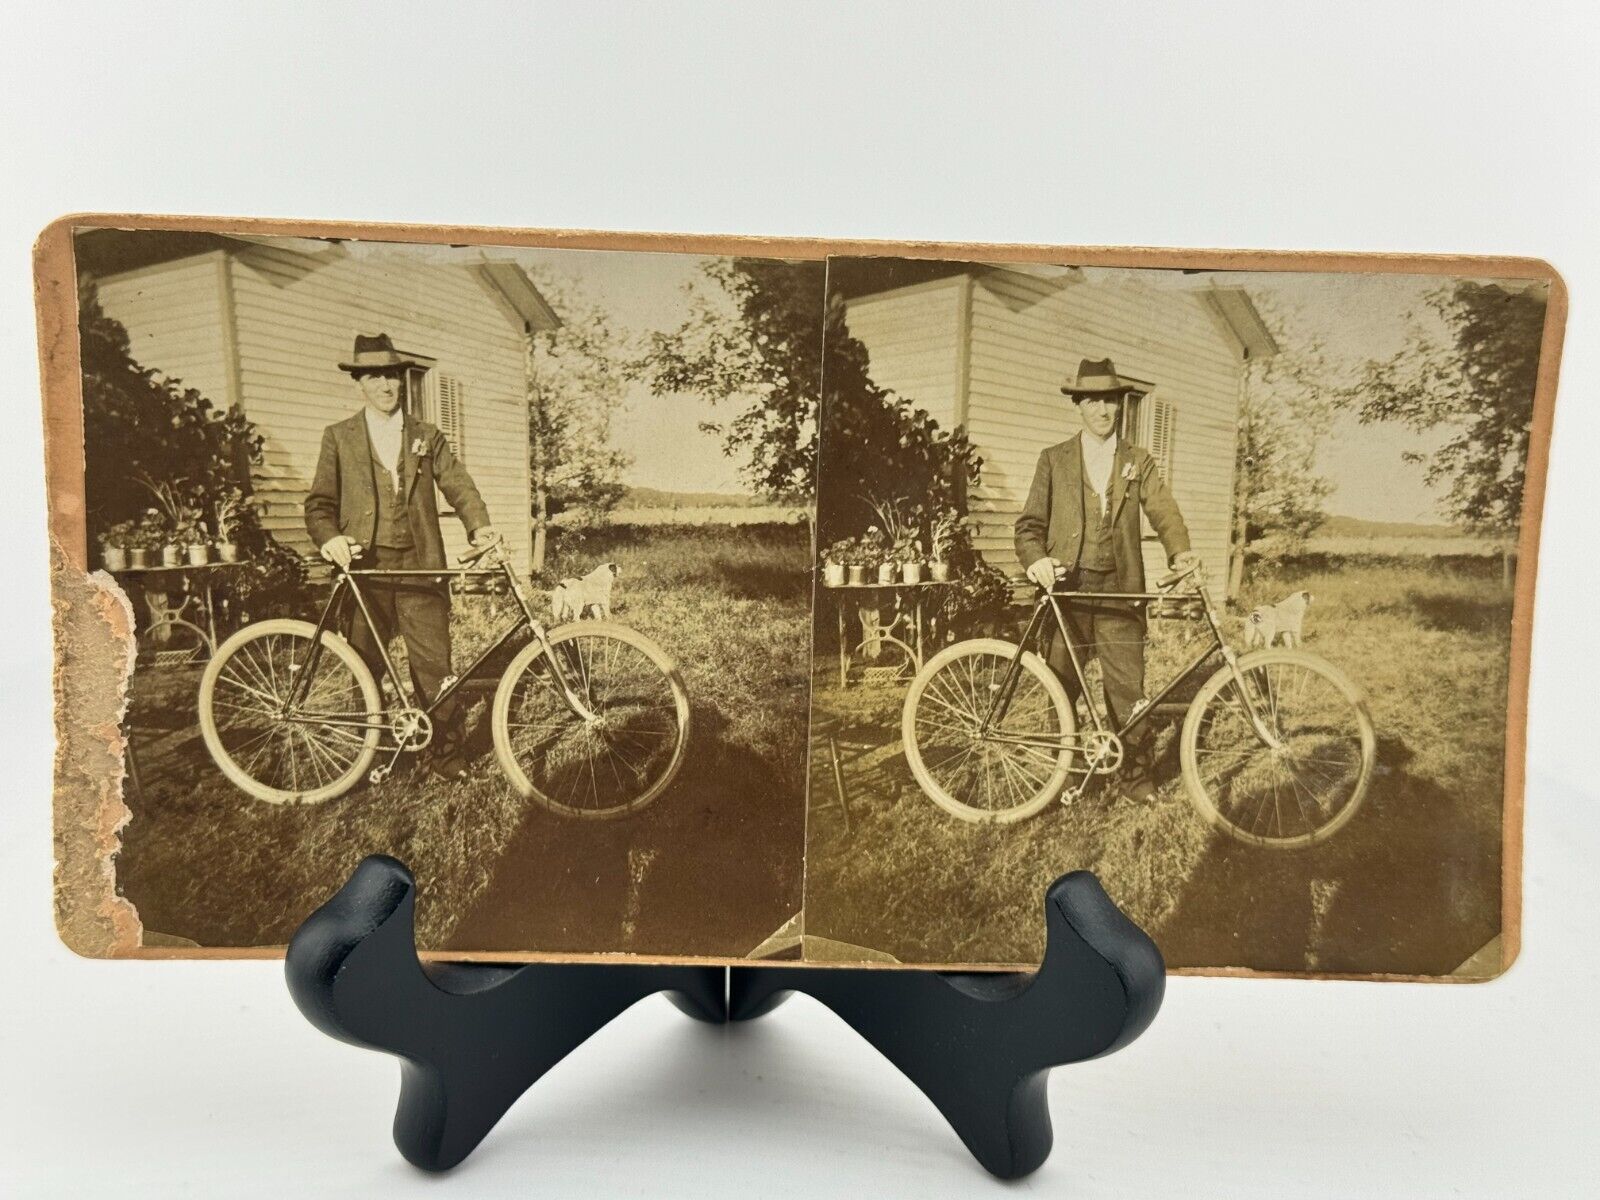 1898 W.R Deverman Bicycle Outside Antique Vintage Stereoscope Card